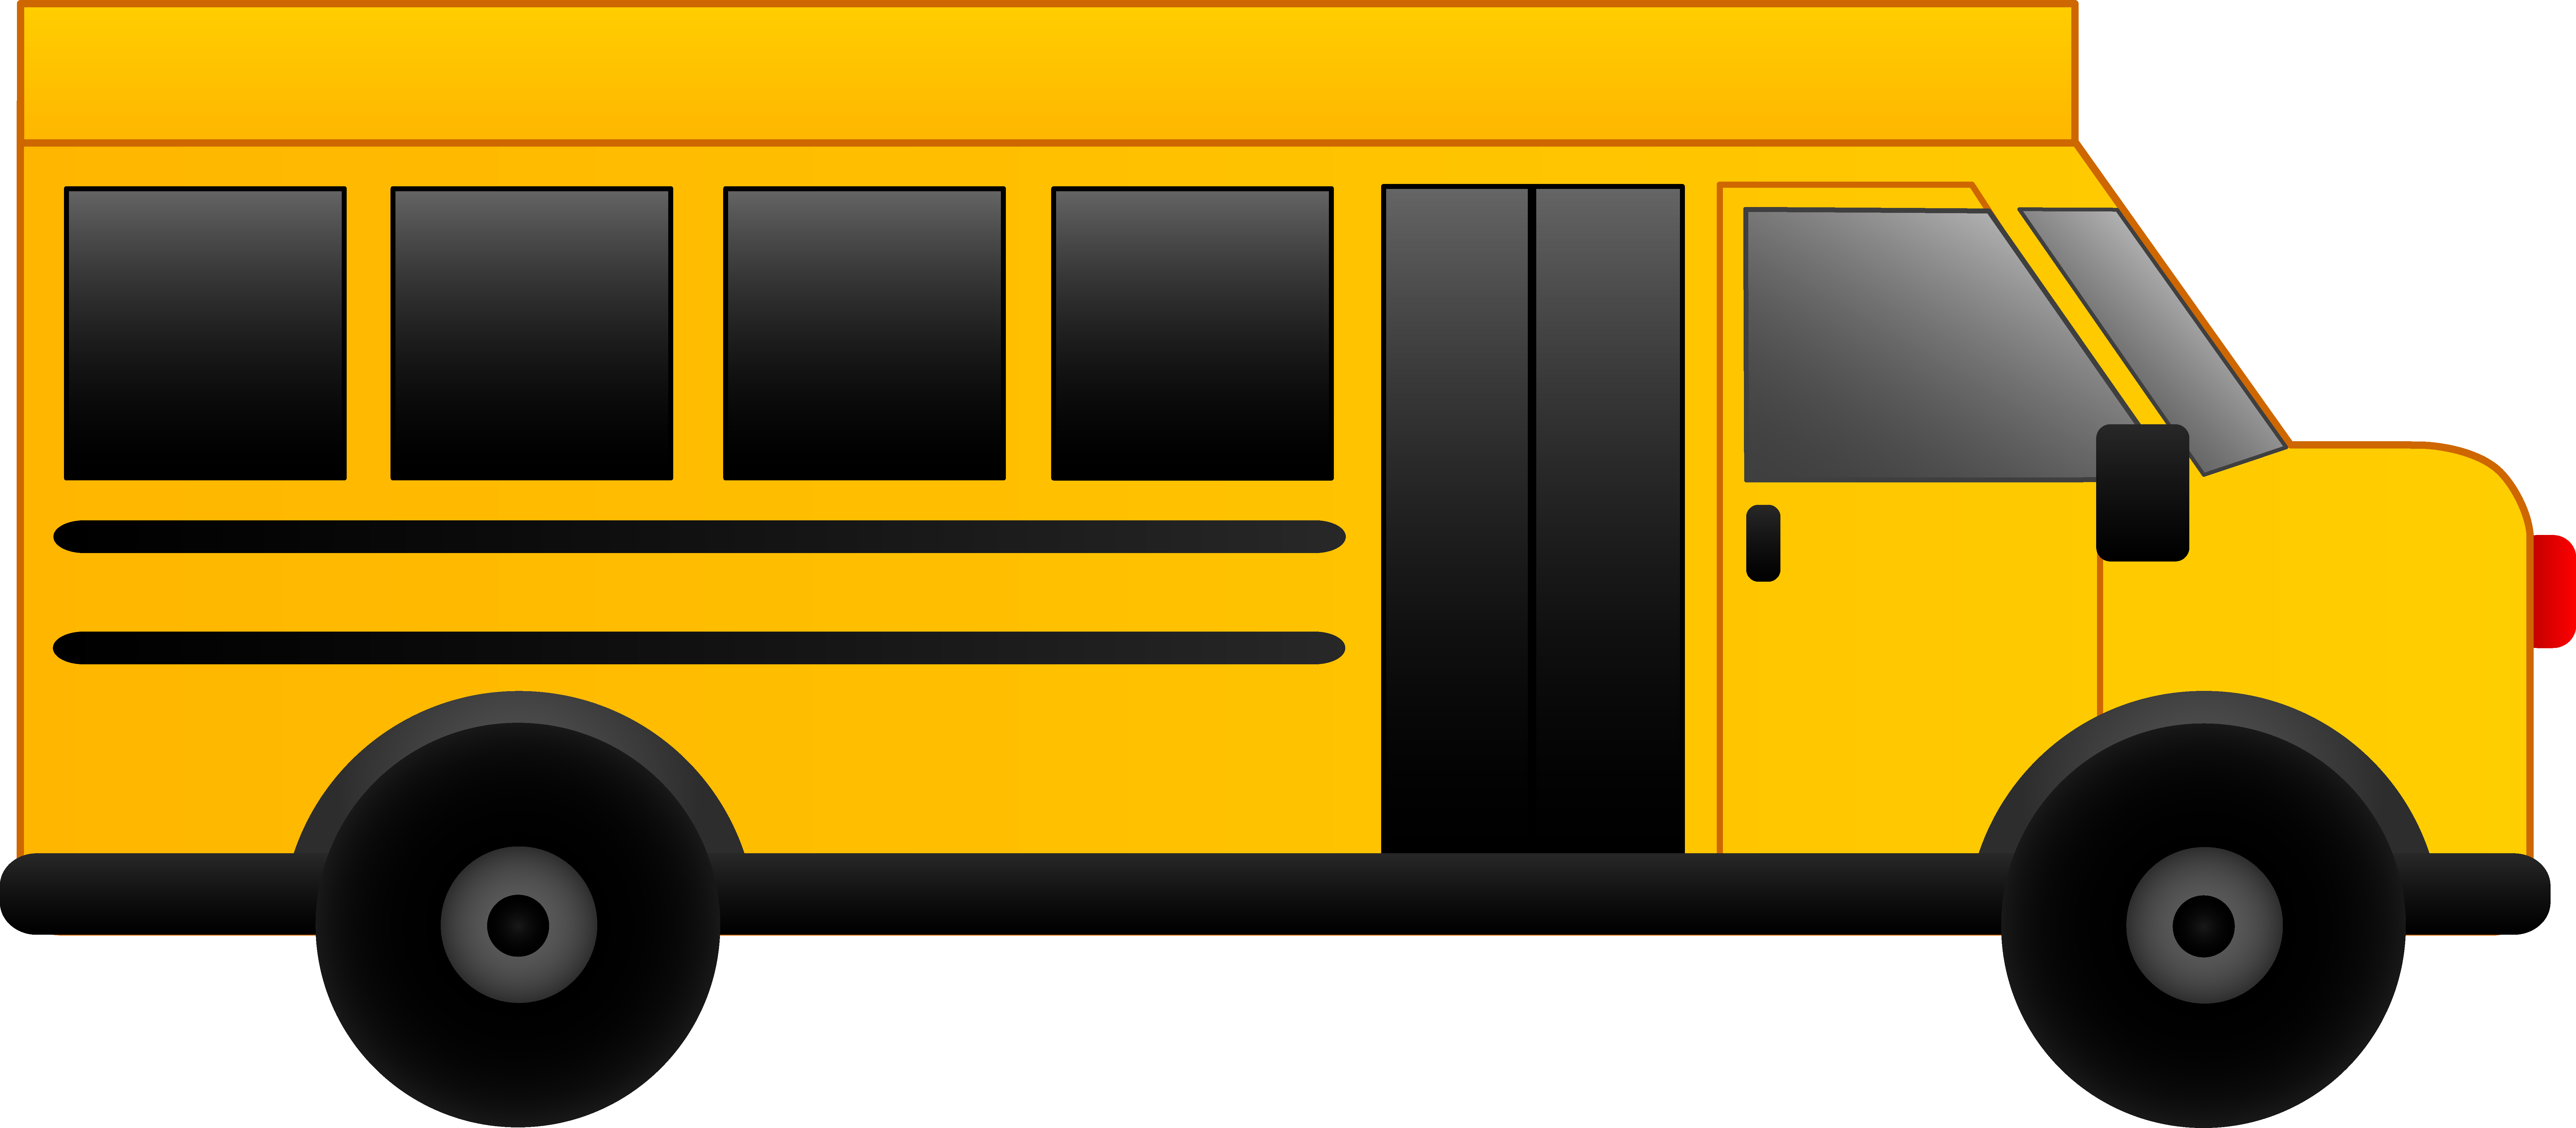 Free clipart of school buses